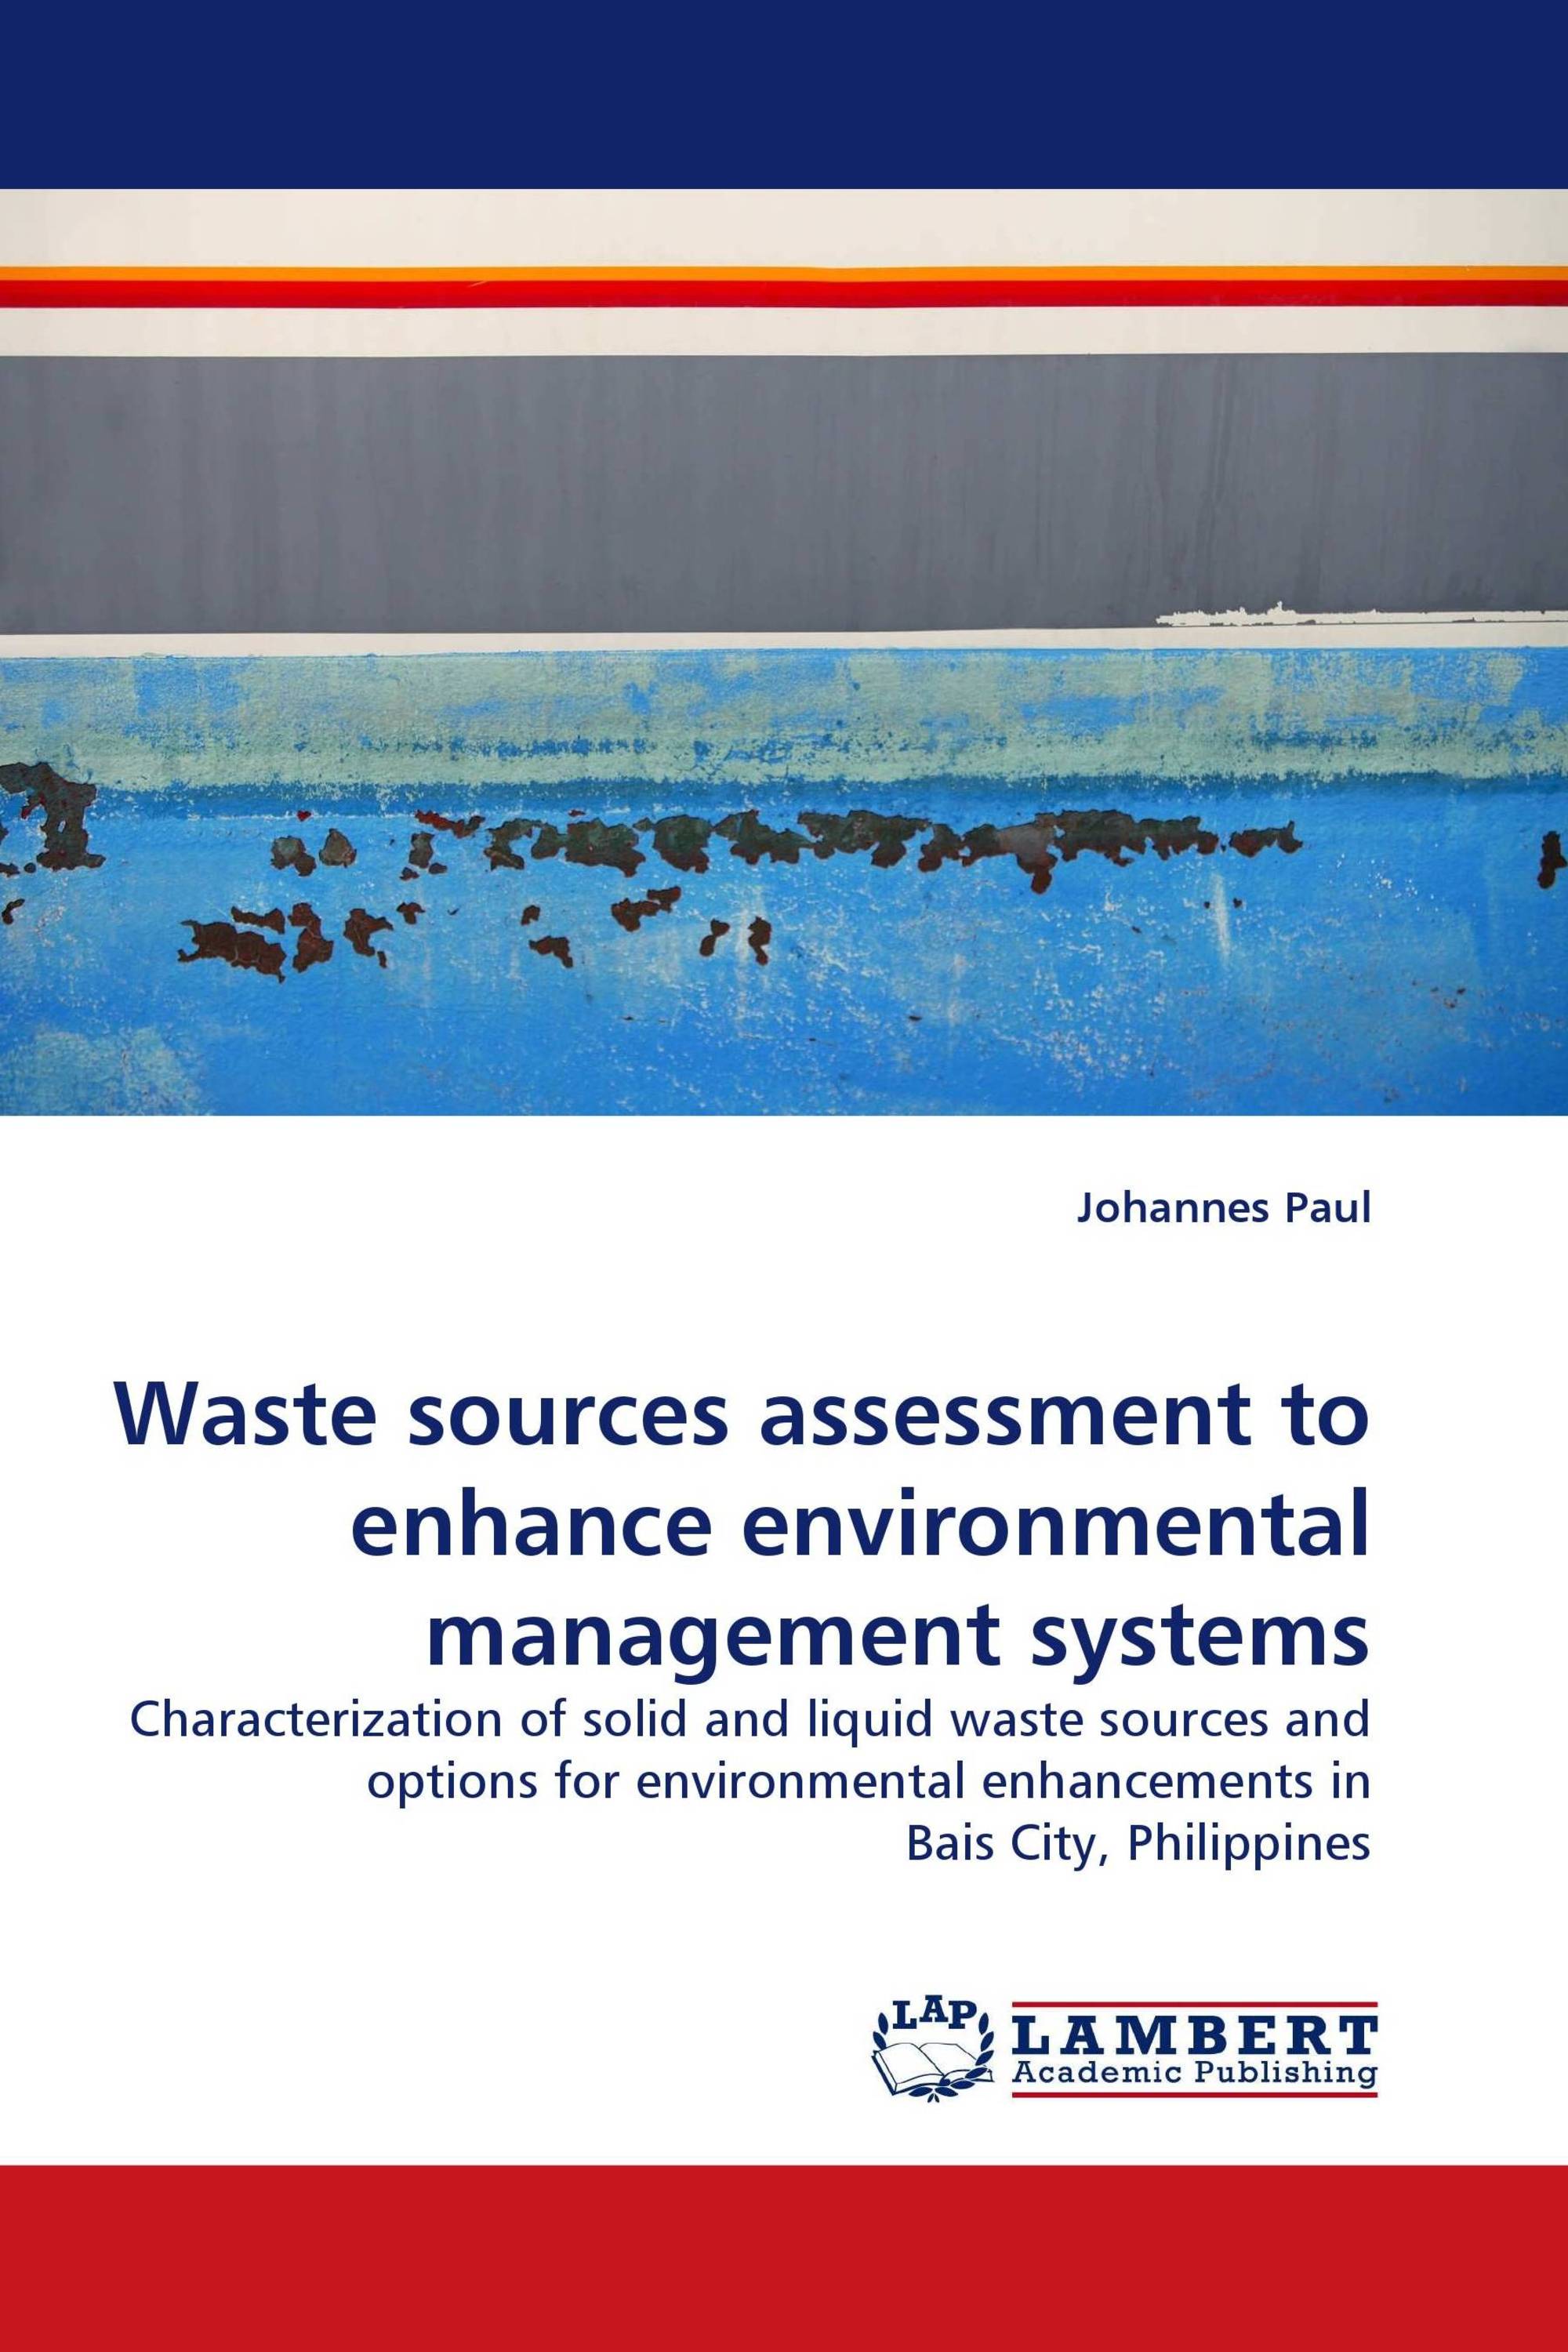 Waste sources assessment to enhance environmental management systems